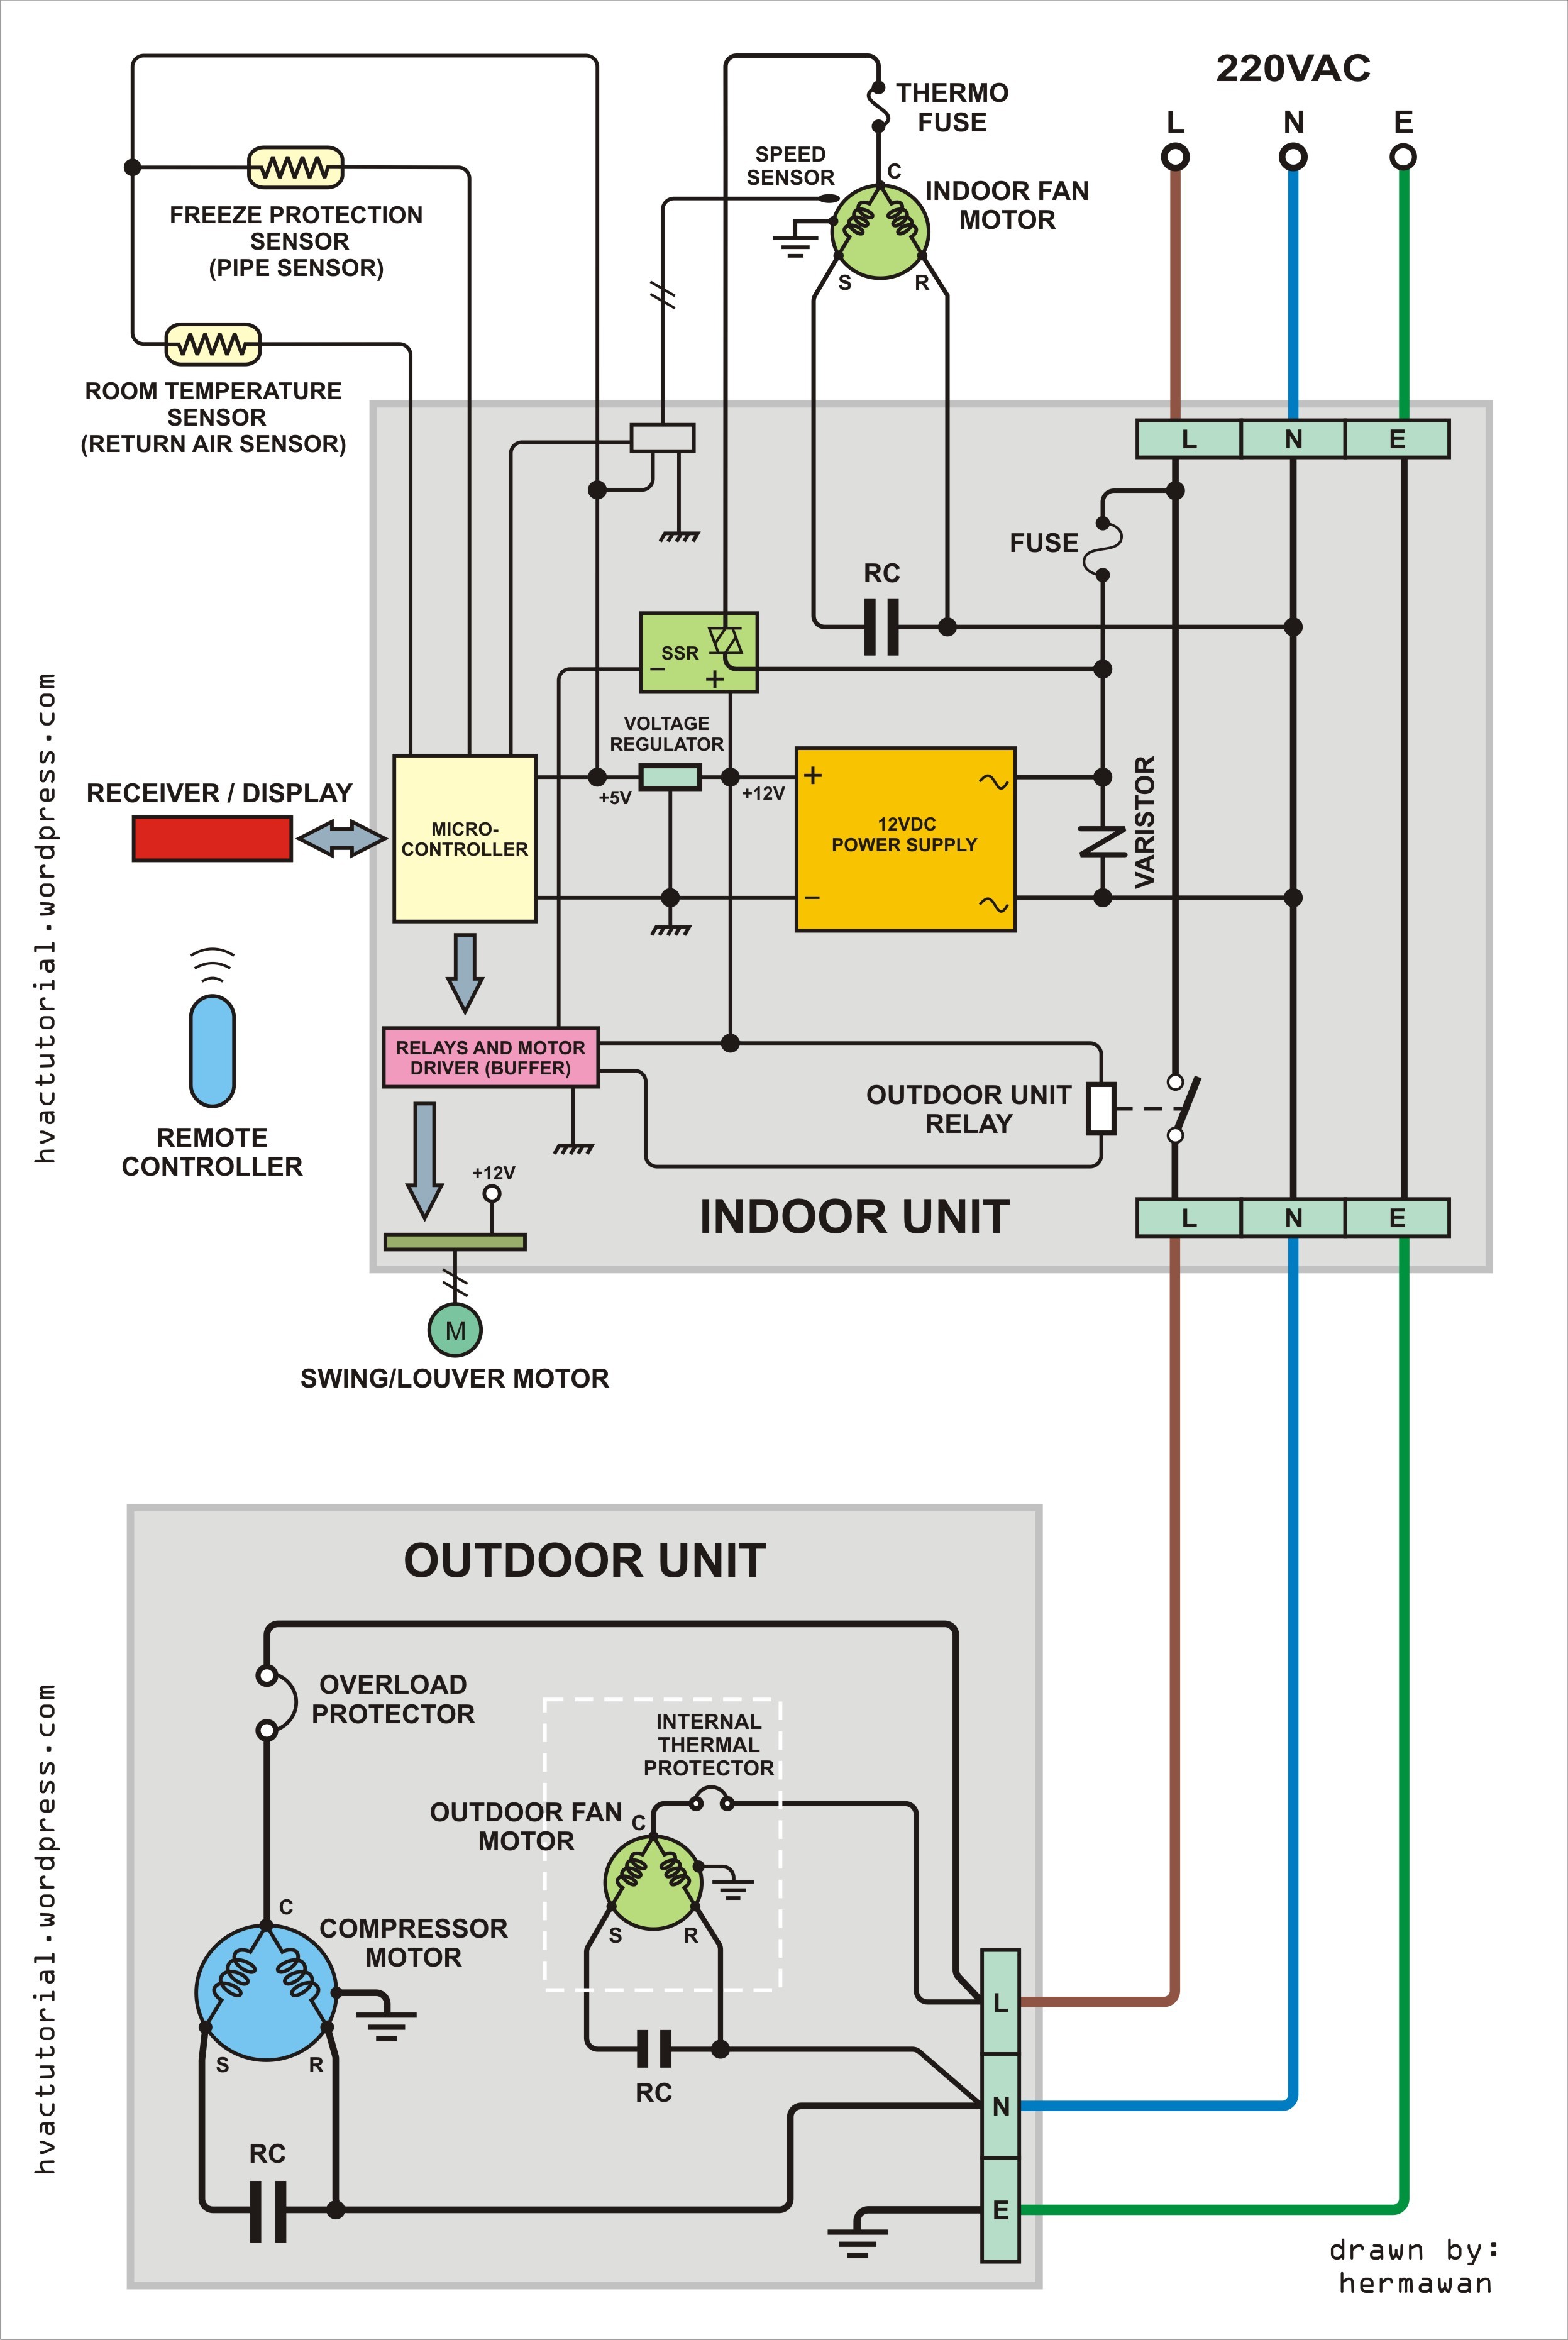 Split Air Conditioner Wiring Diagram Hermawan S Blog For Ac Tryit Me Remote Control Winch Wiring Diagram Ac Wiring Diagram